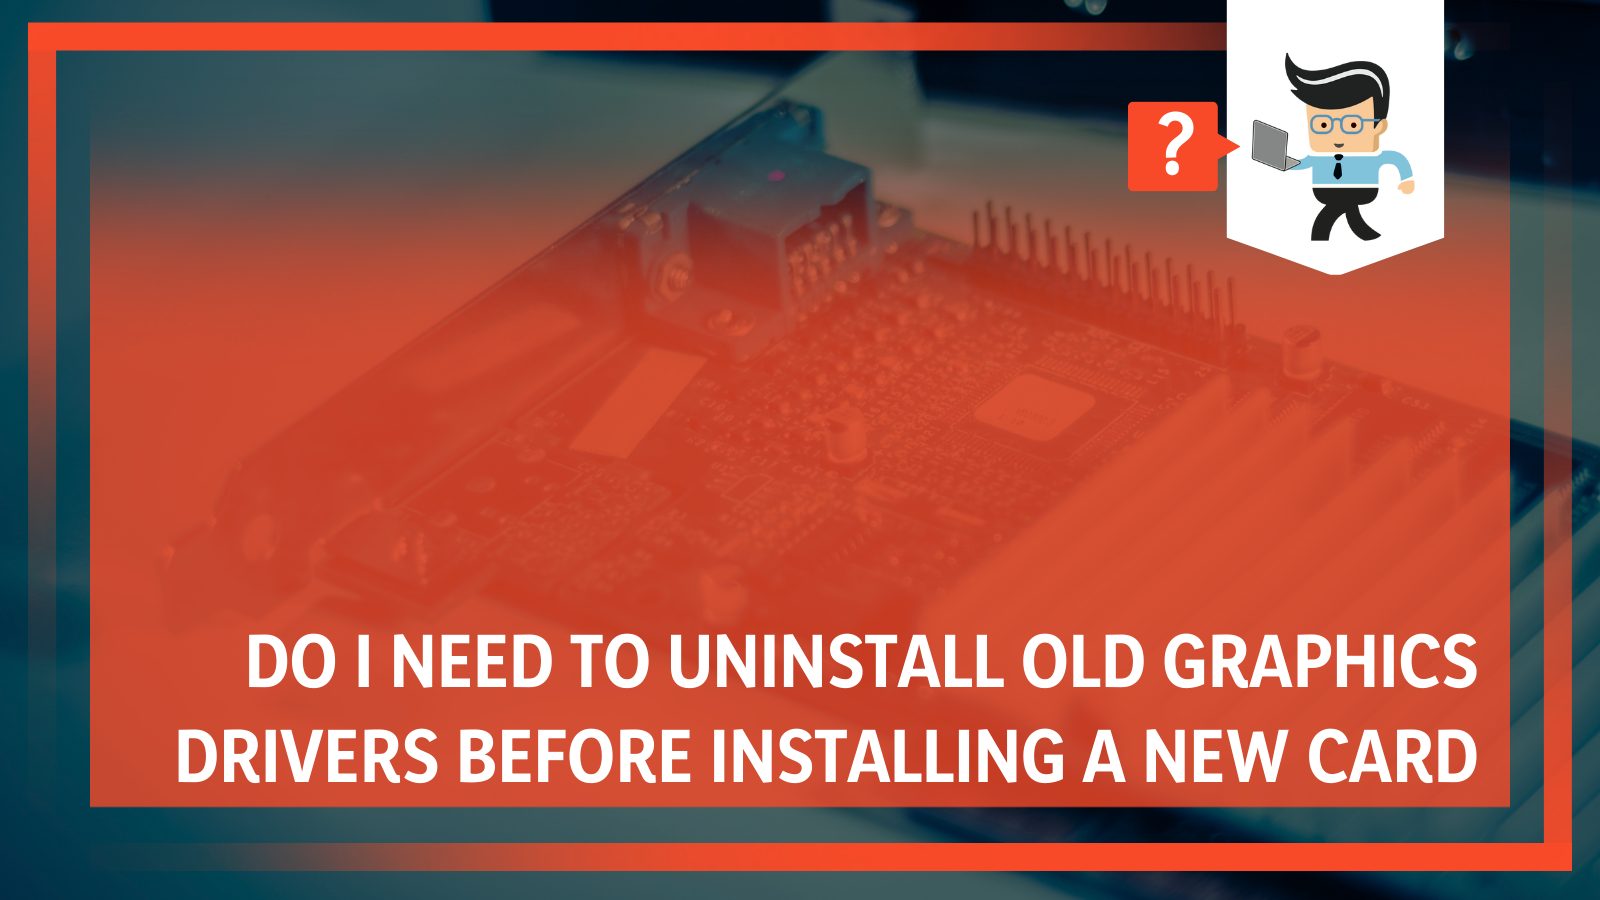 Uninstall Old Graphics Drivers Before Installing a New Card